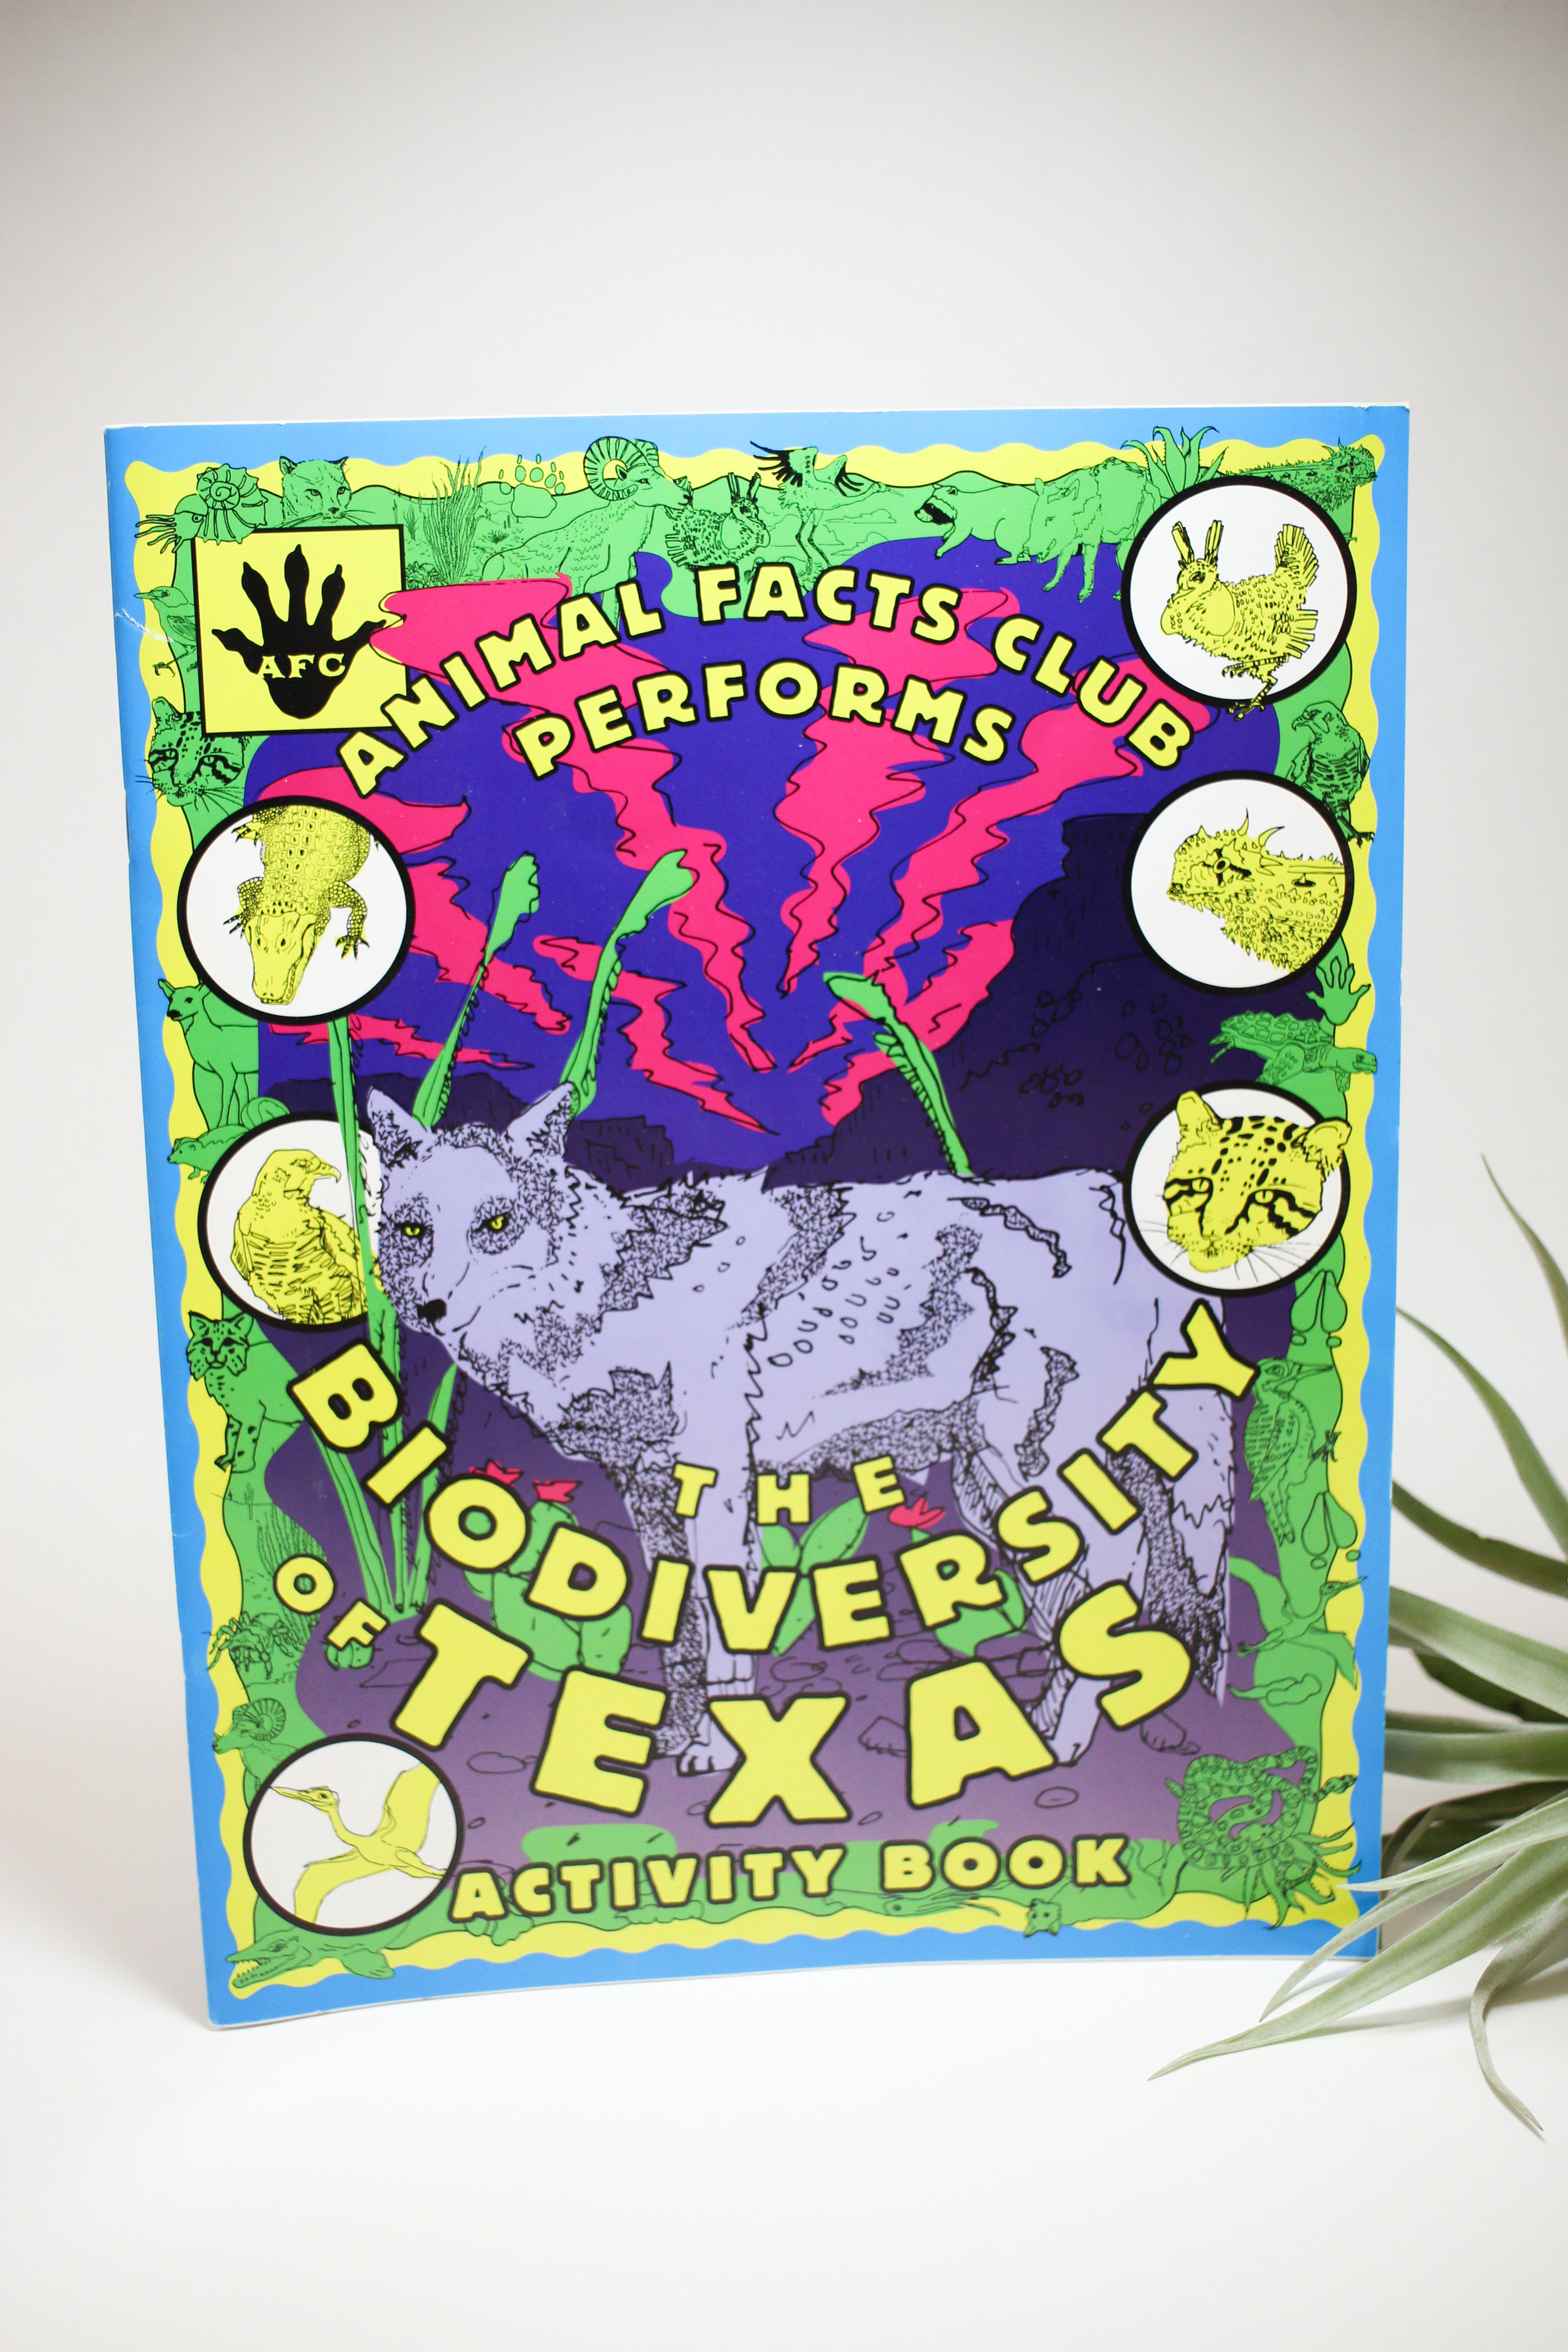 The Biodiversity of Texas Activity Book by Animal Facts Club